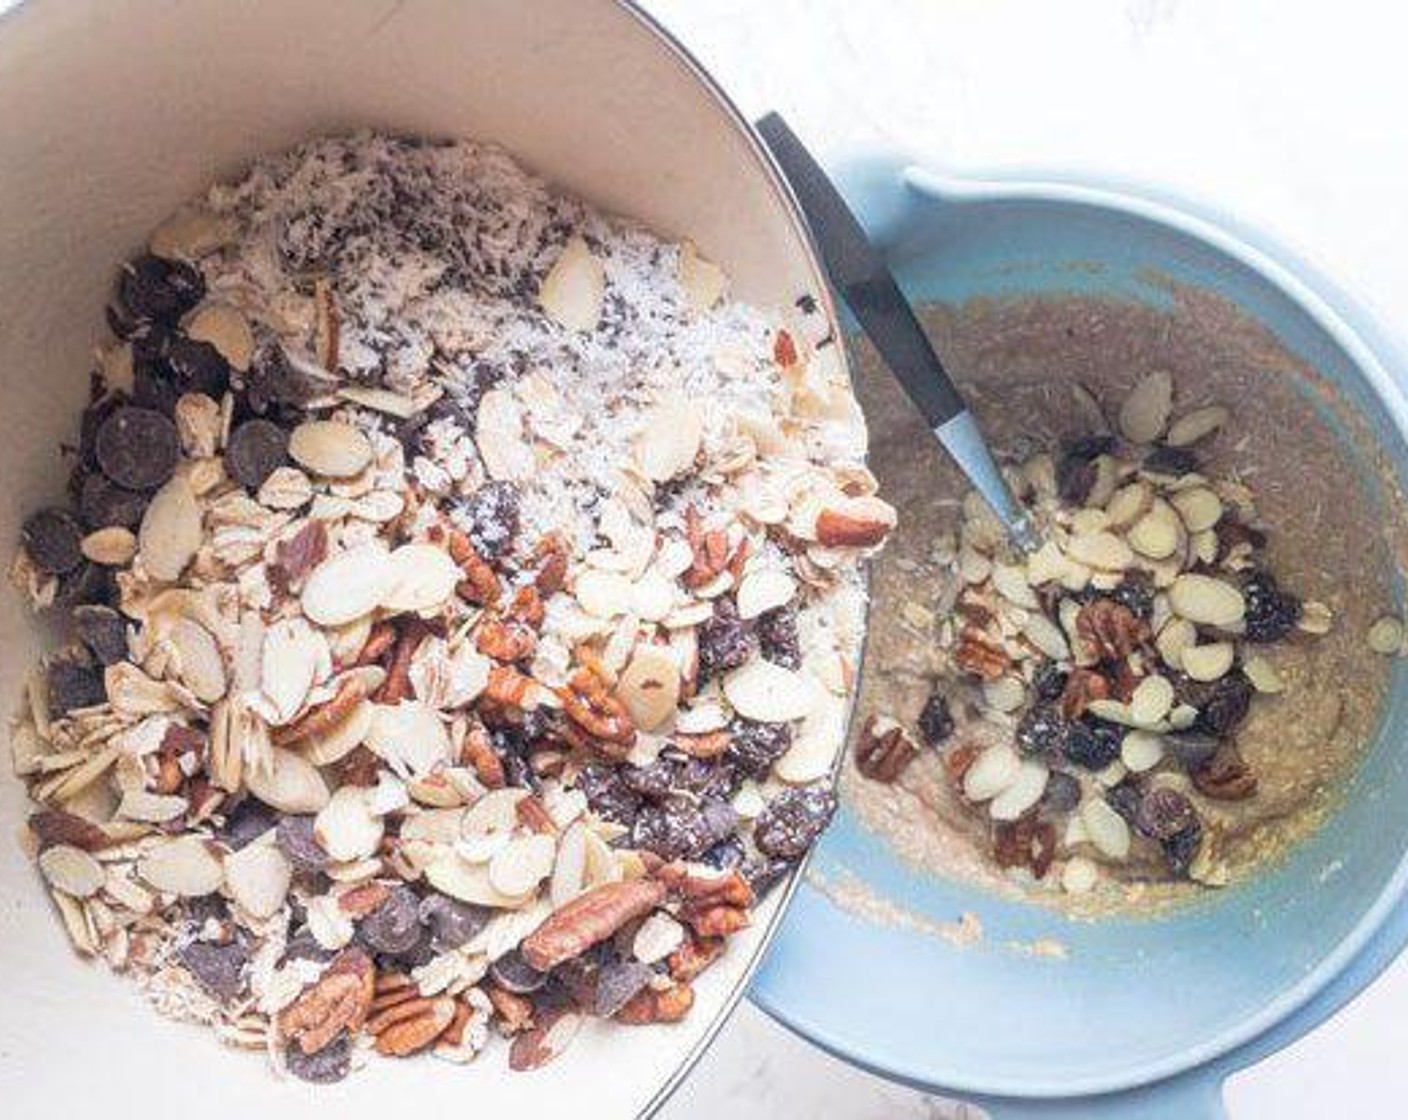 step 4 Add favorite mix-ins, such as Vegan Chocolate Chips (2/3 cup), Slivered Almonds (1/3 cup), Chopped Pecans (1/3 cup), Raisins (1/3 cup), or Unsweetened Shredded Coconut (1/4 cup) to dry ingredients and mix well. Pour dry ingredients into wet ingredients and stir well.